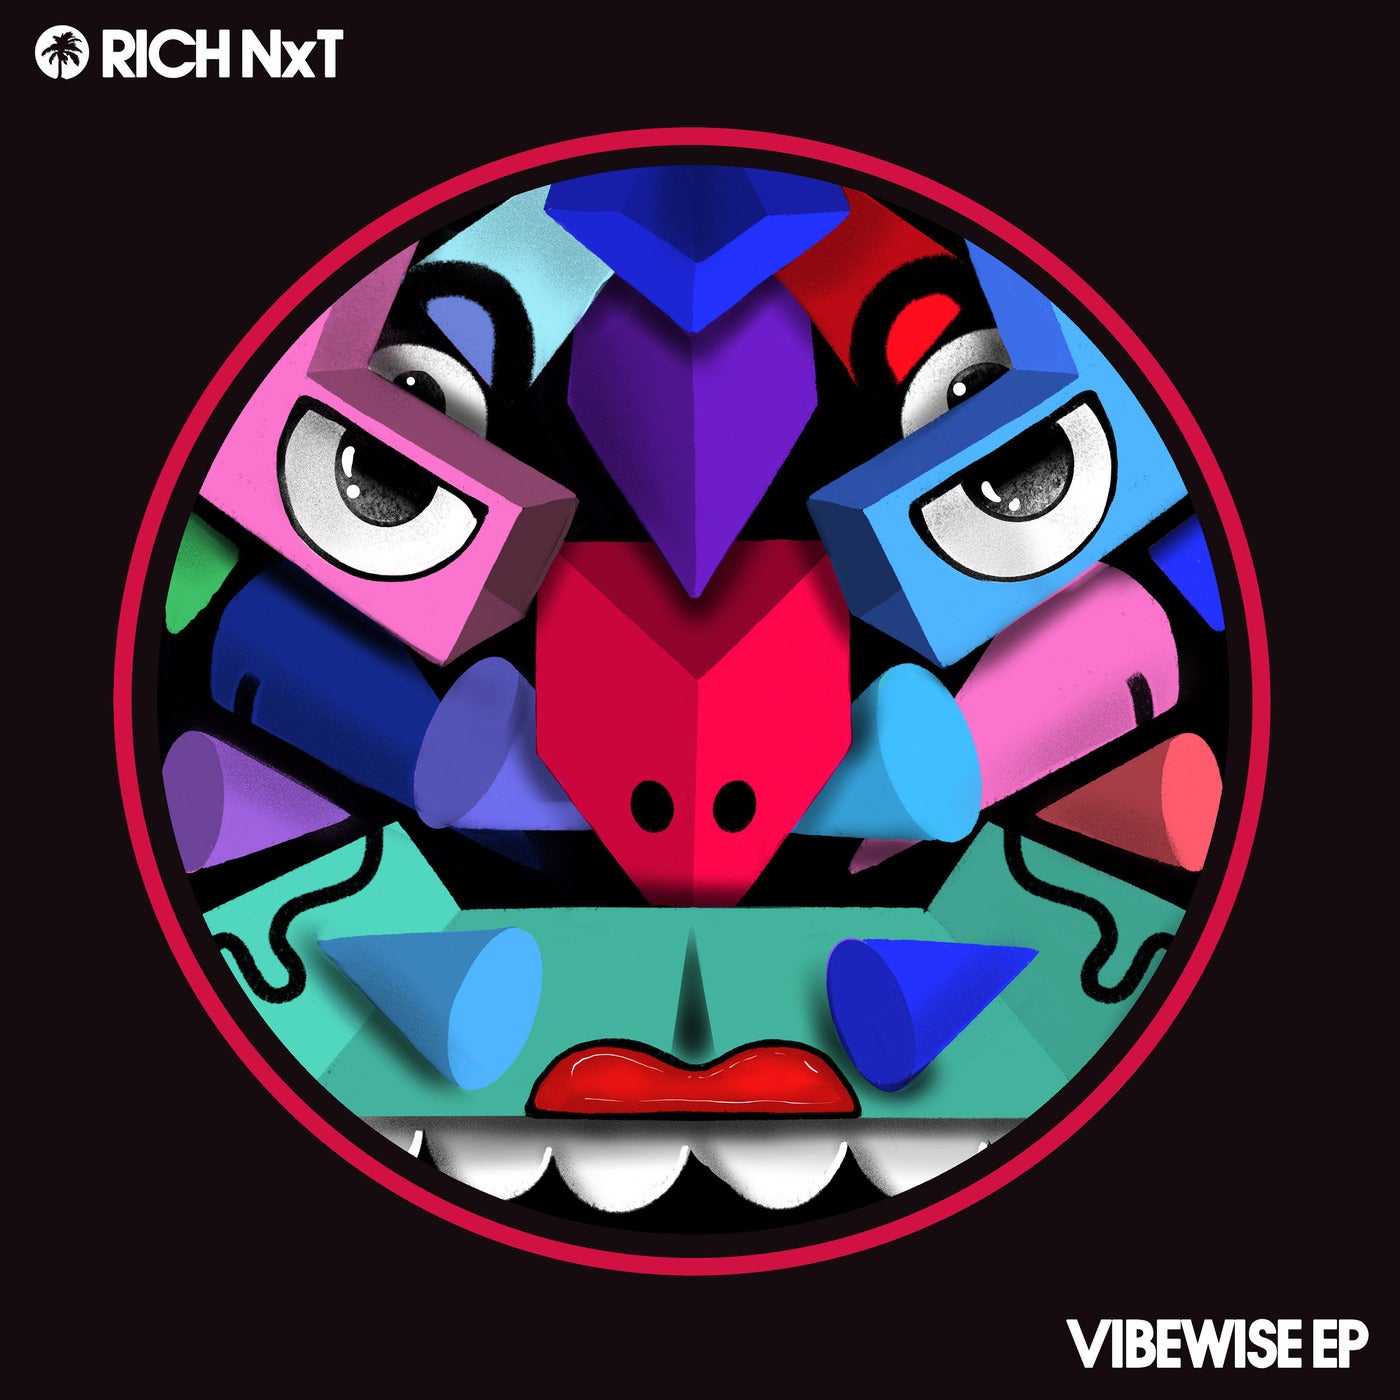 image cover: Rich NxT - Vibewise EP / HOTC180